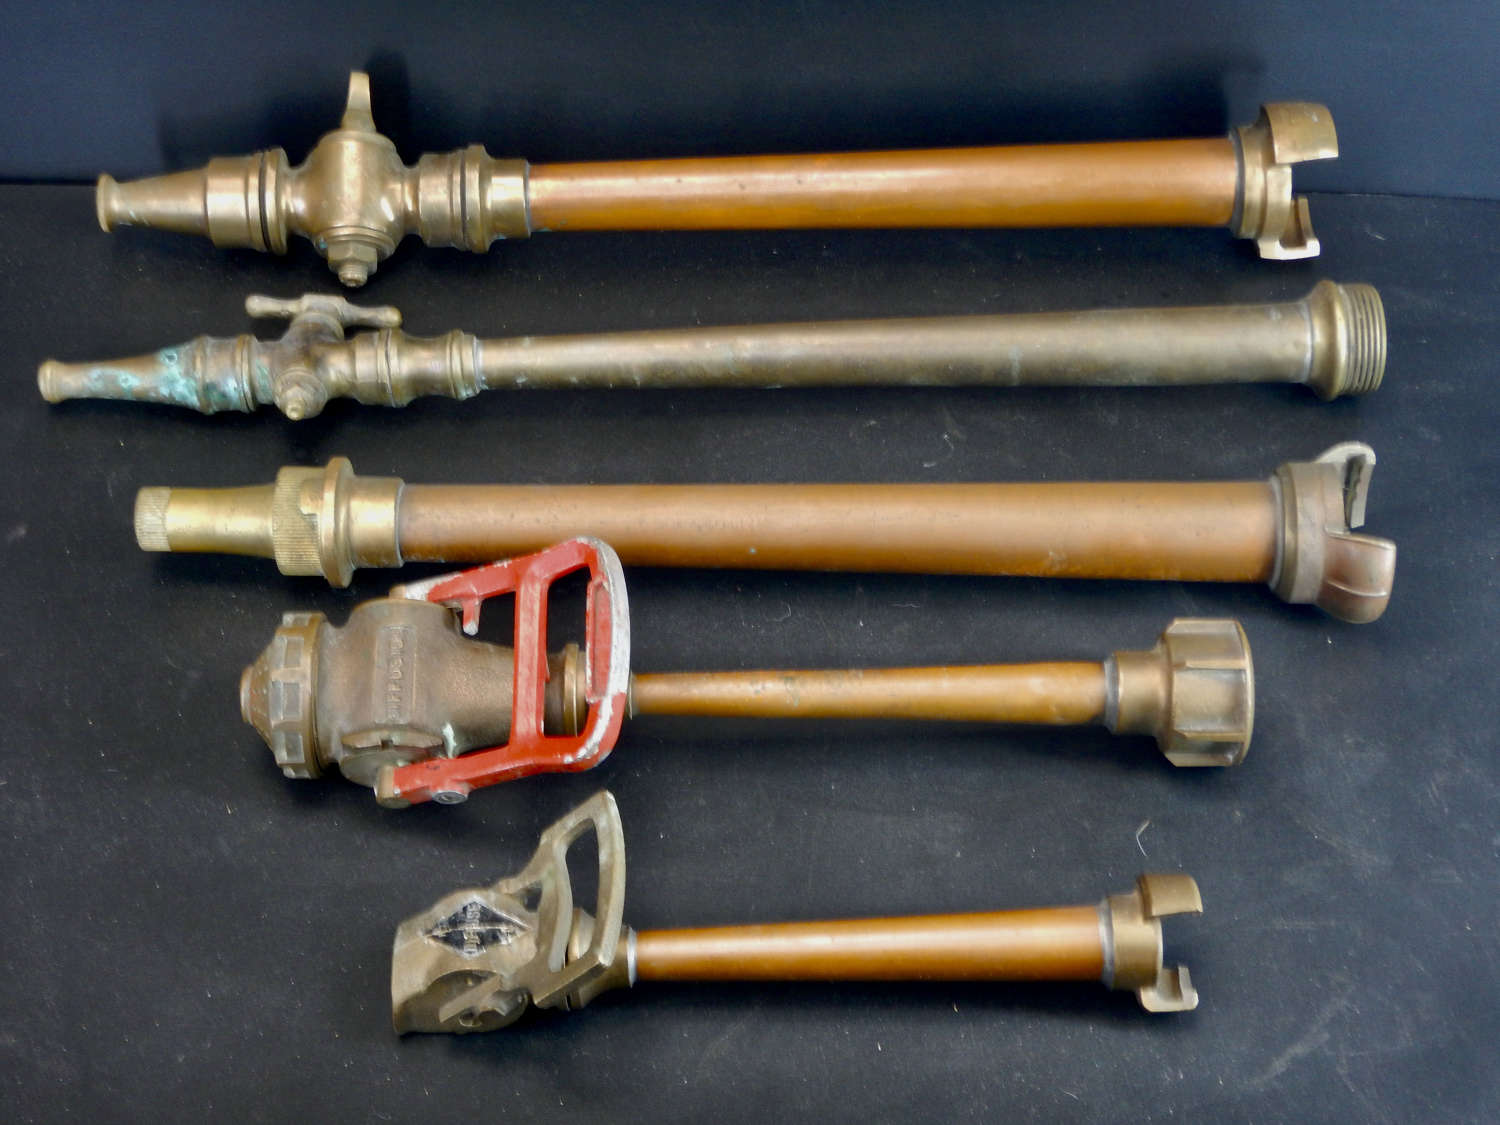 A Collection of Fire Hose Nozzles - French Fire Nozzle  - Original